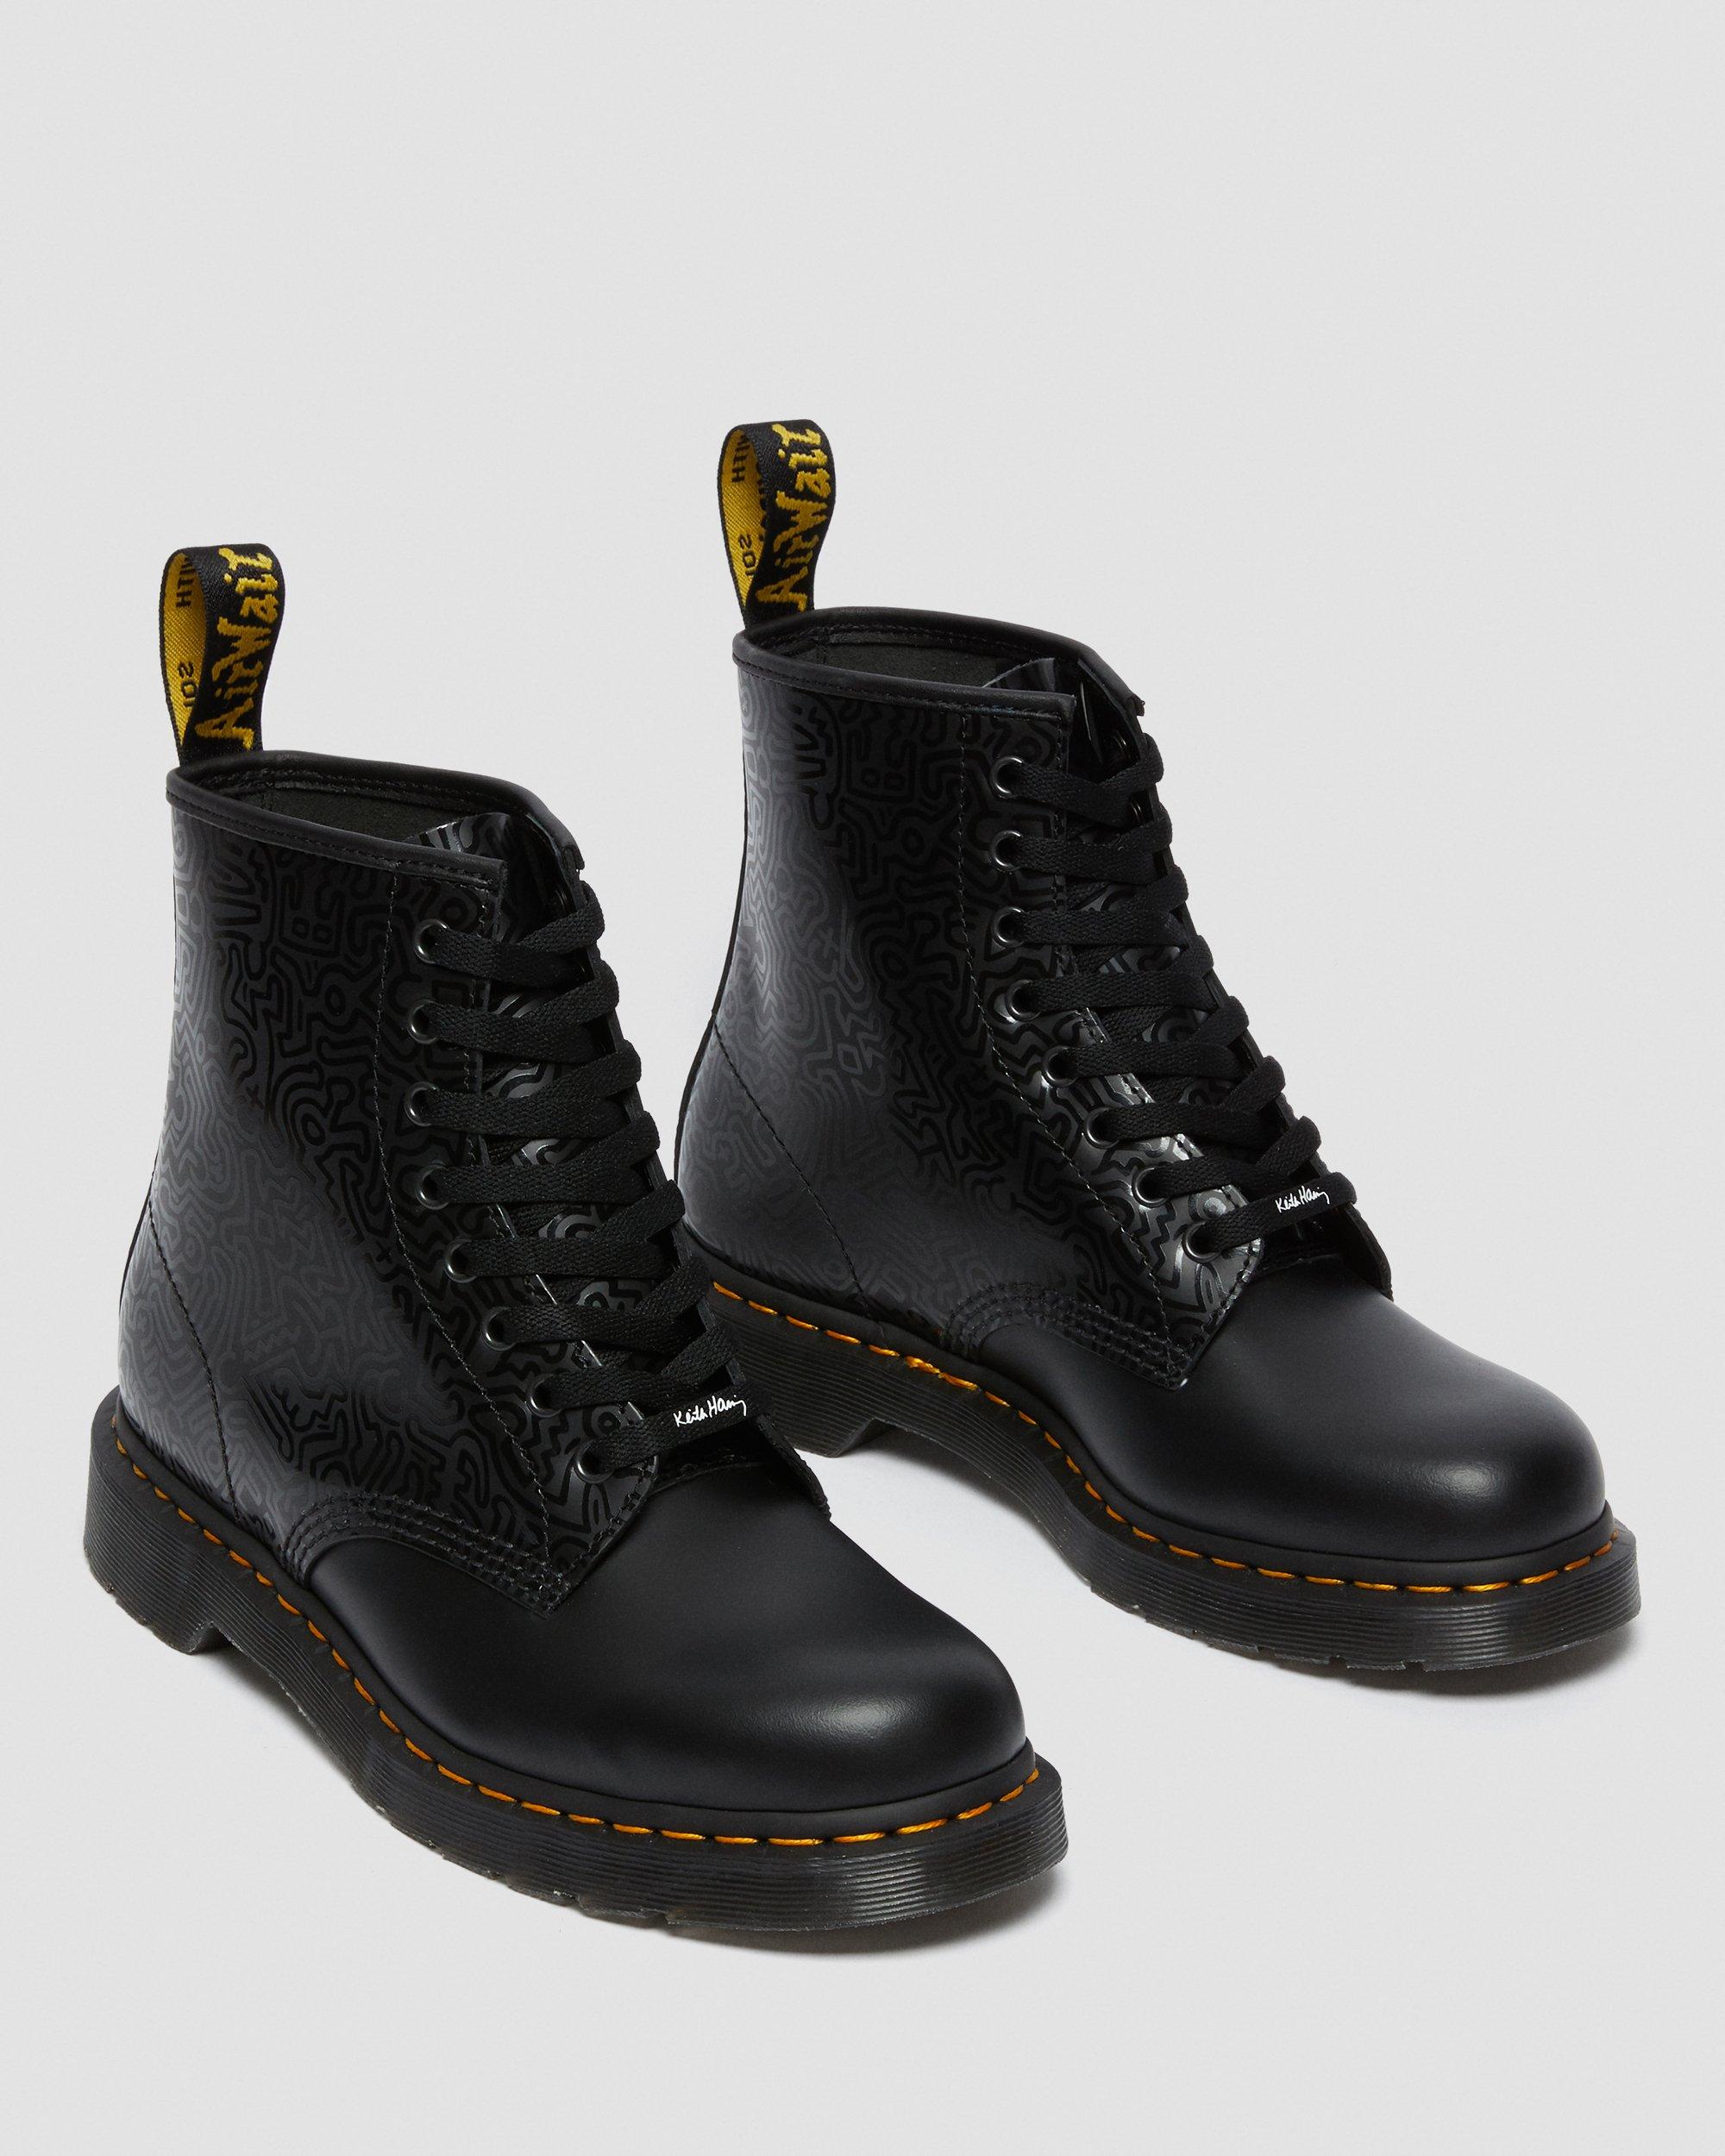 Keith Haring 1460 Smooth Leather Lace Up Boots | Dr. Martens